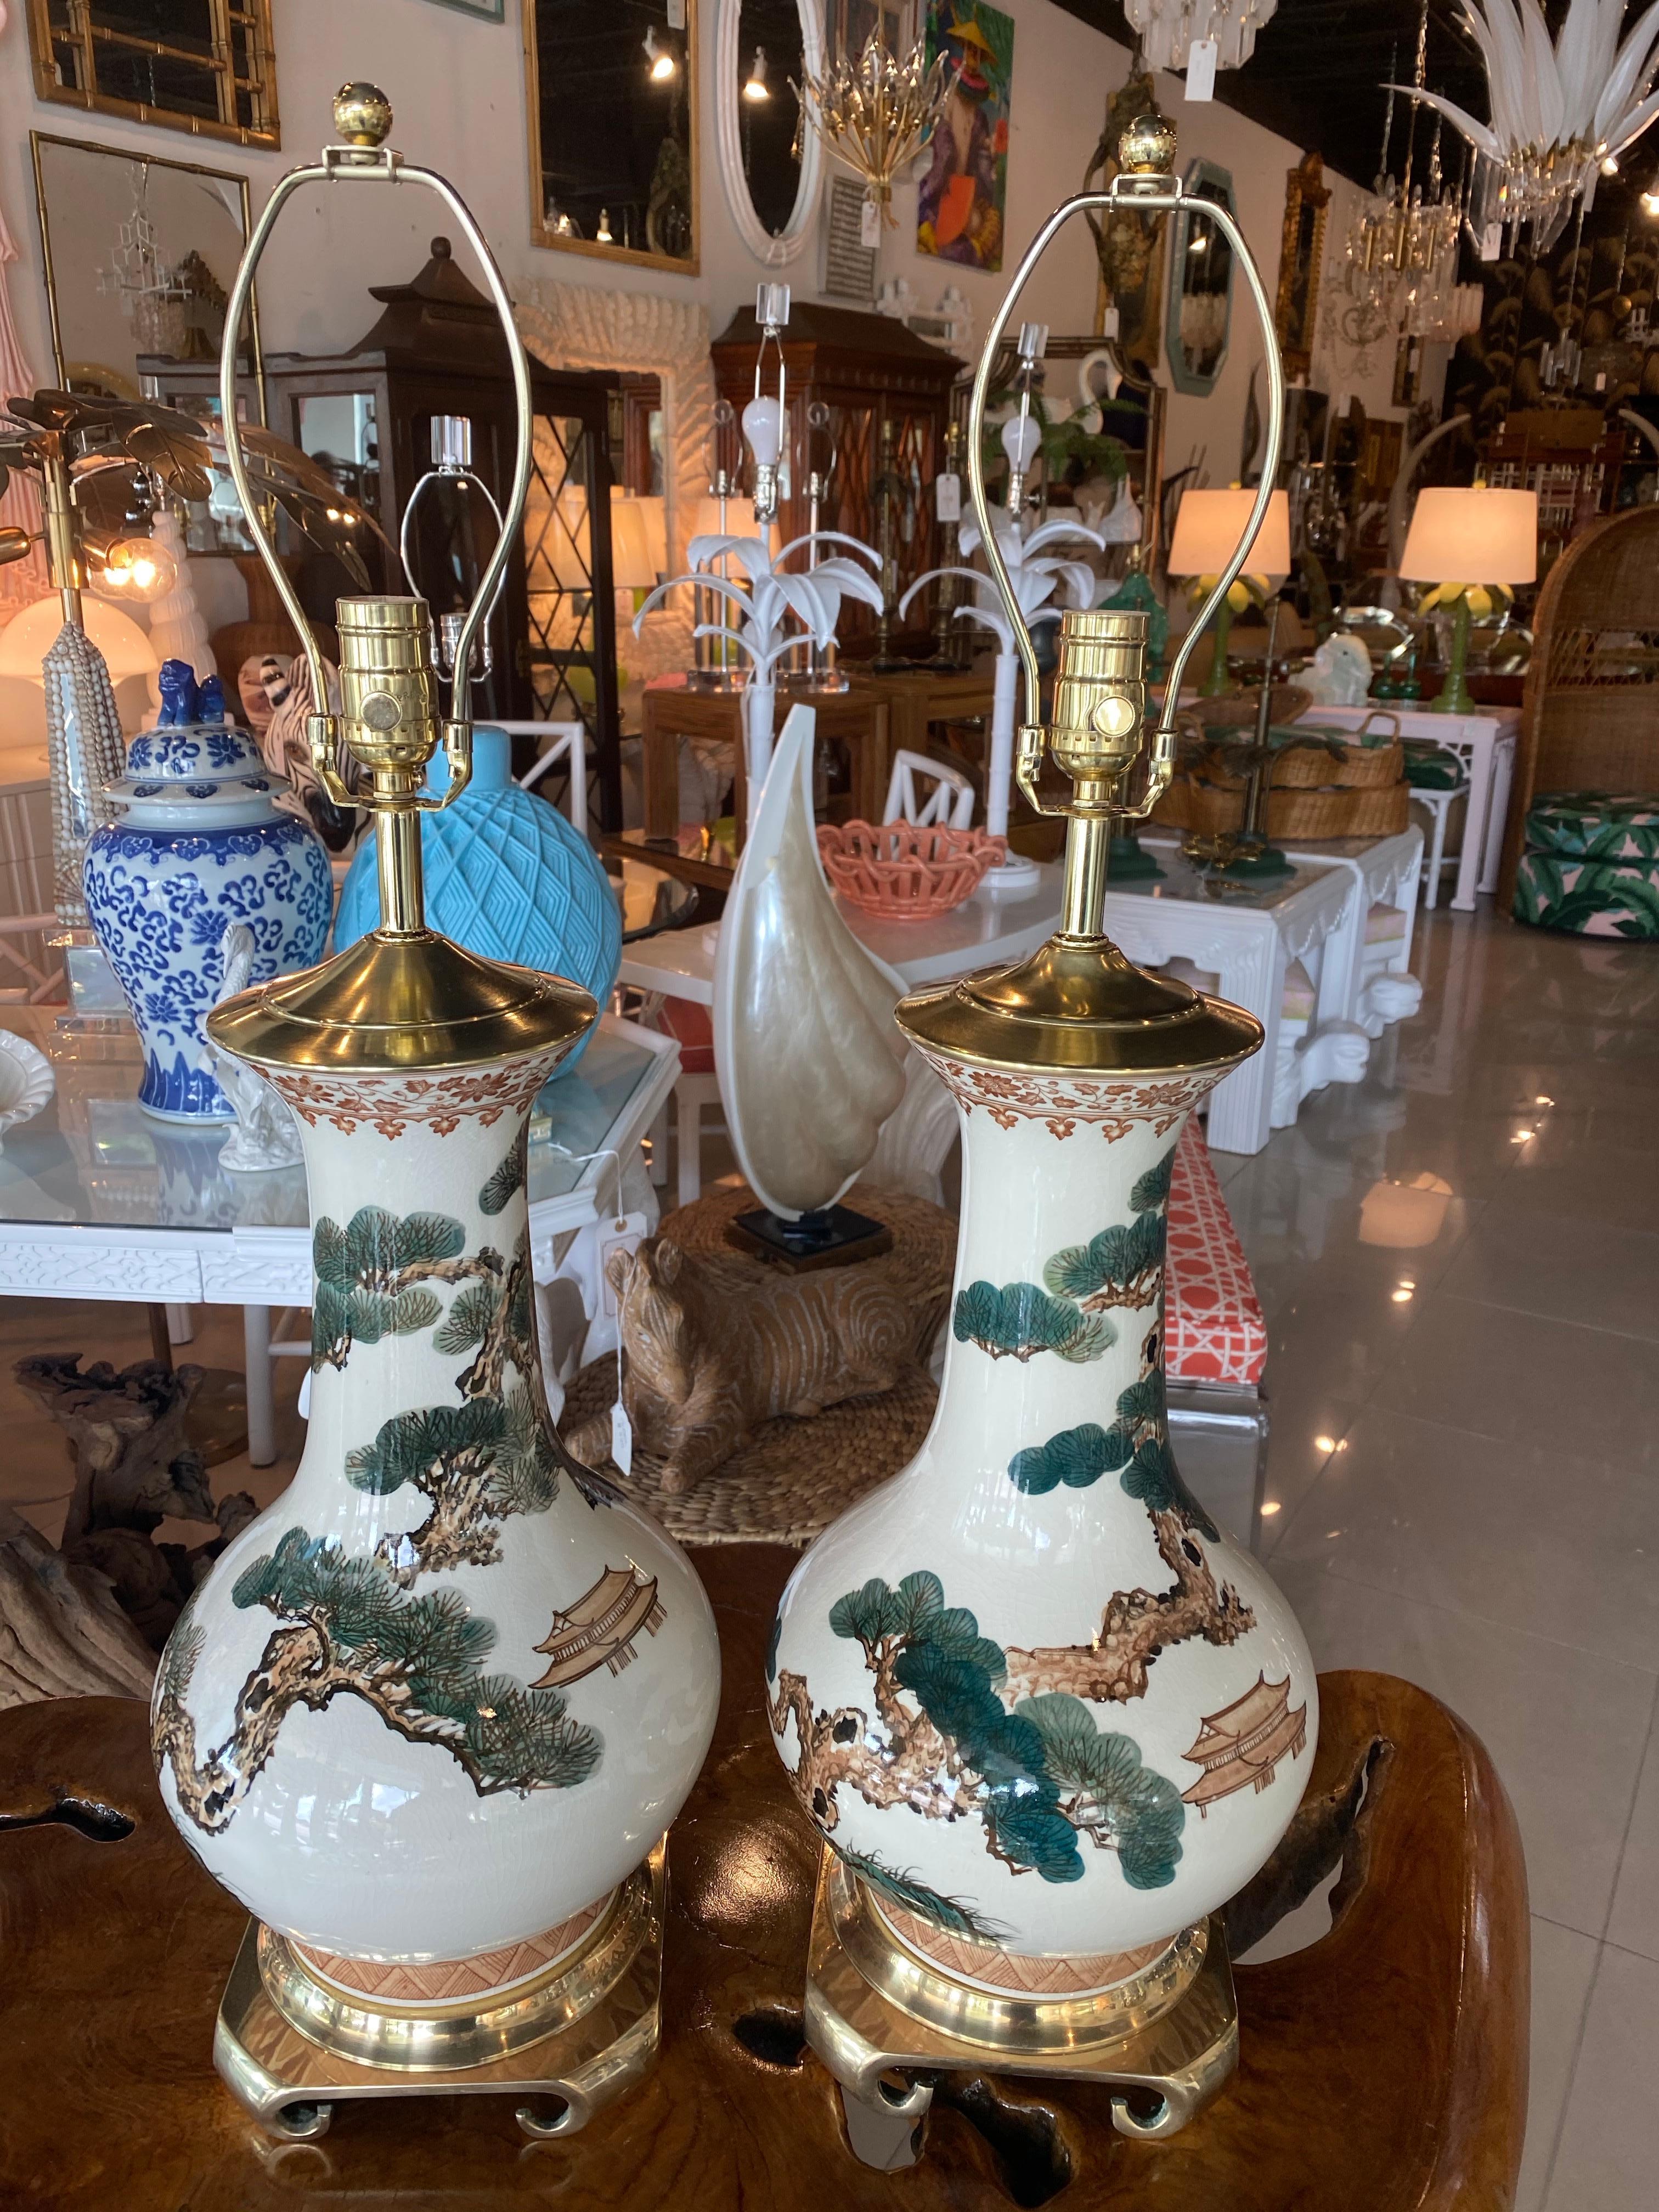 Lovely pair of vintage chinoiserie ceramic table lamps. Lovely design with trees and pagoda house. Newly wired. Original brass Greek key base has been polished. New brass hardware. These have great size and weight to them. No chips or